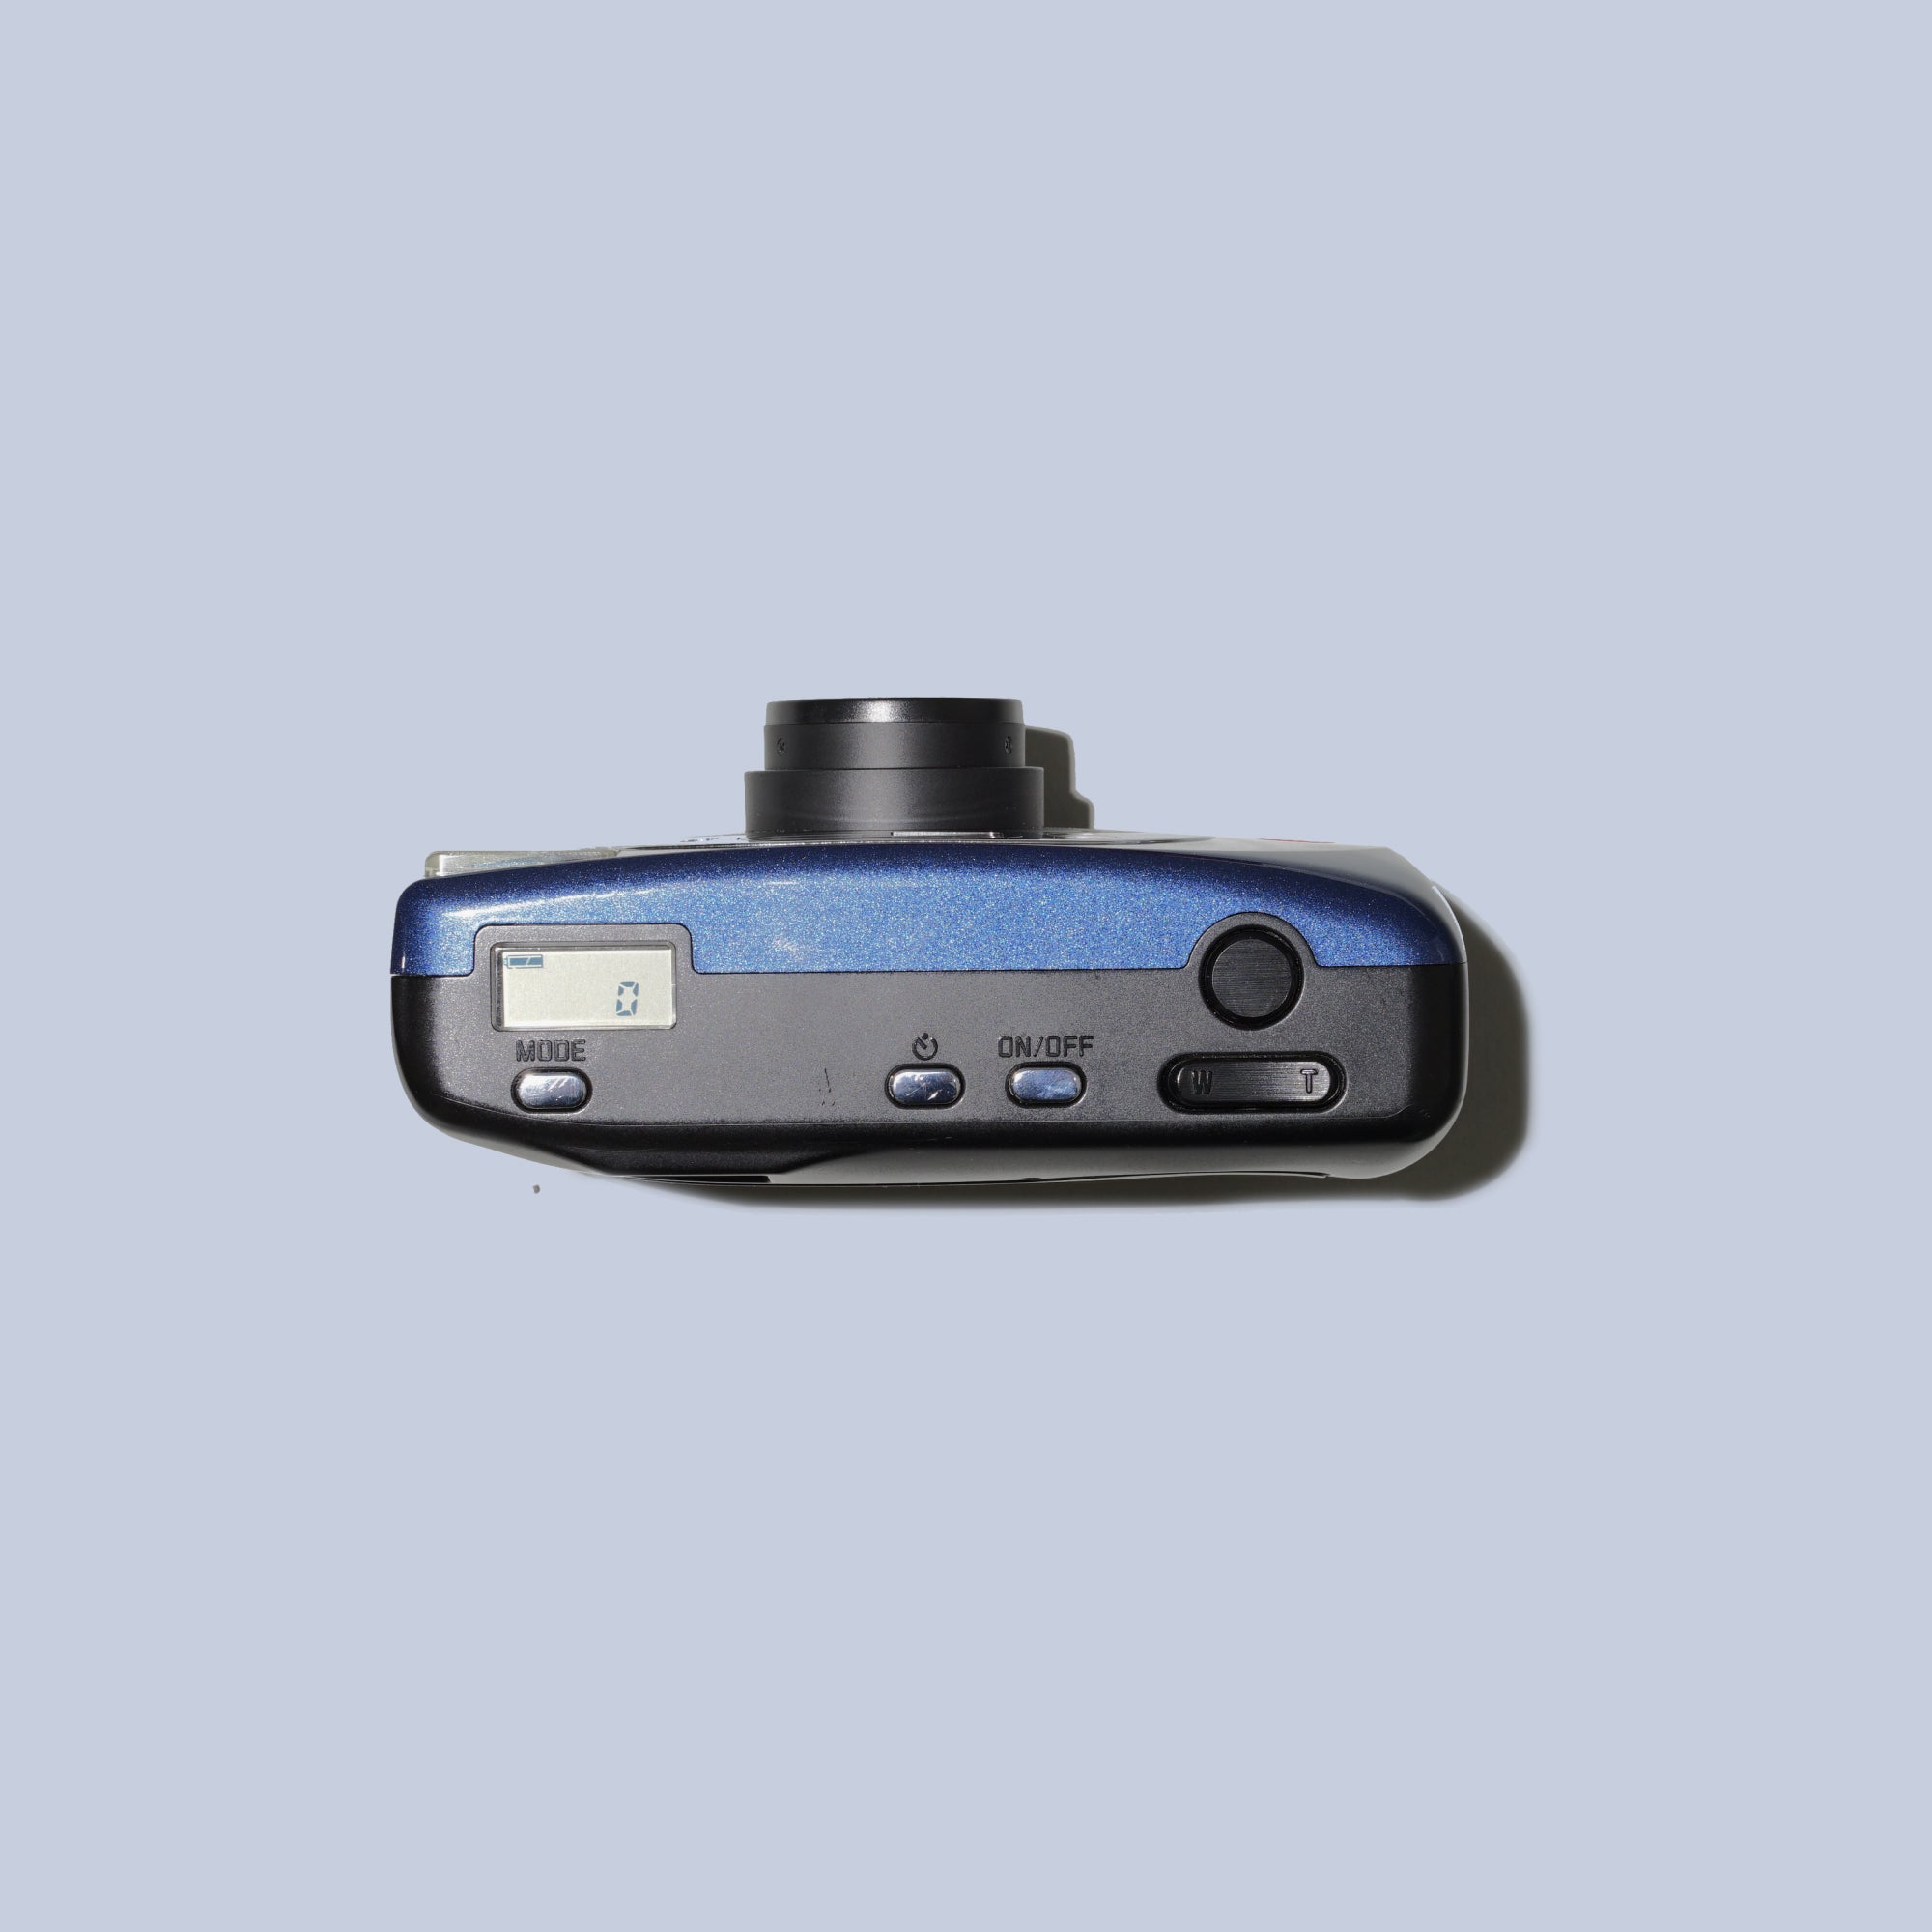 Buy Leica Z2X Blue now at Analogue Amsterdam